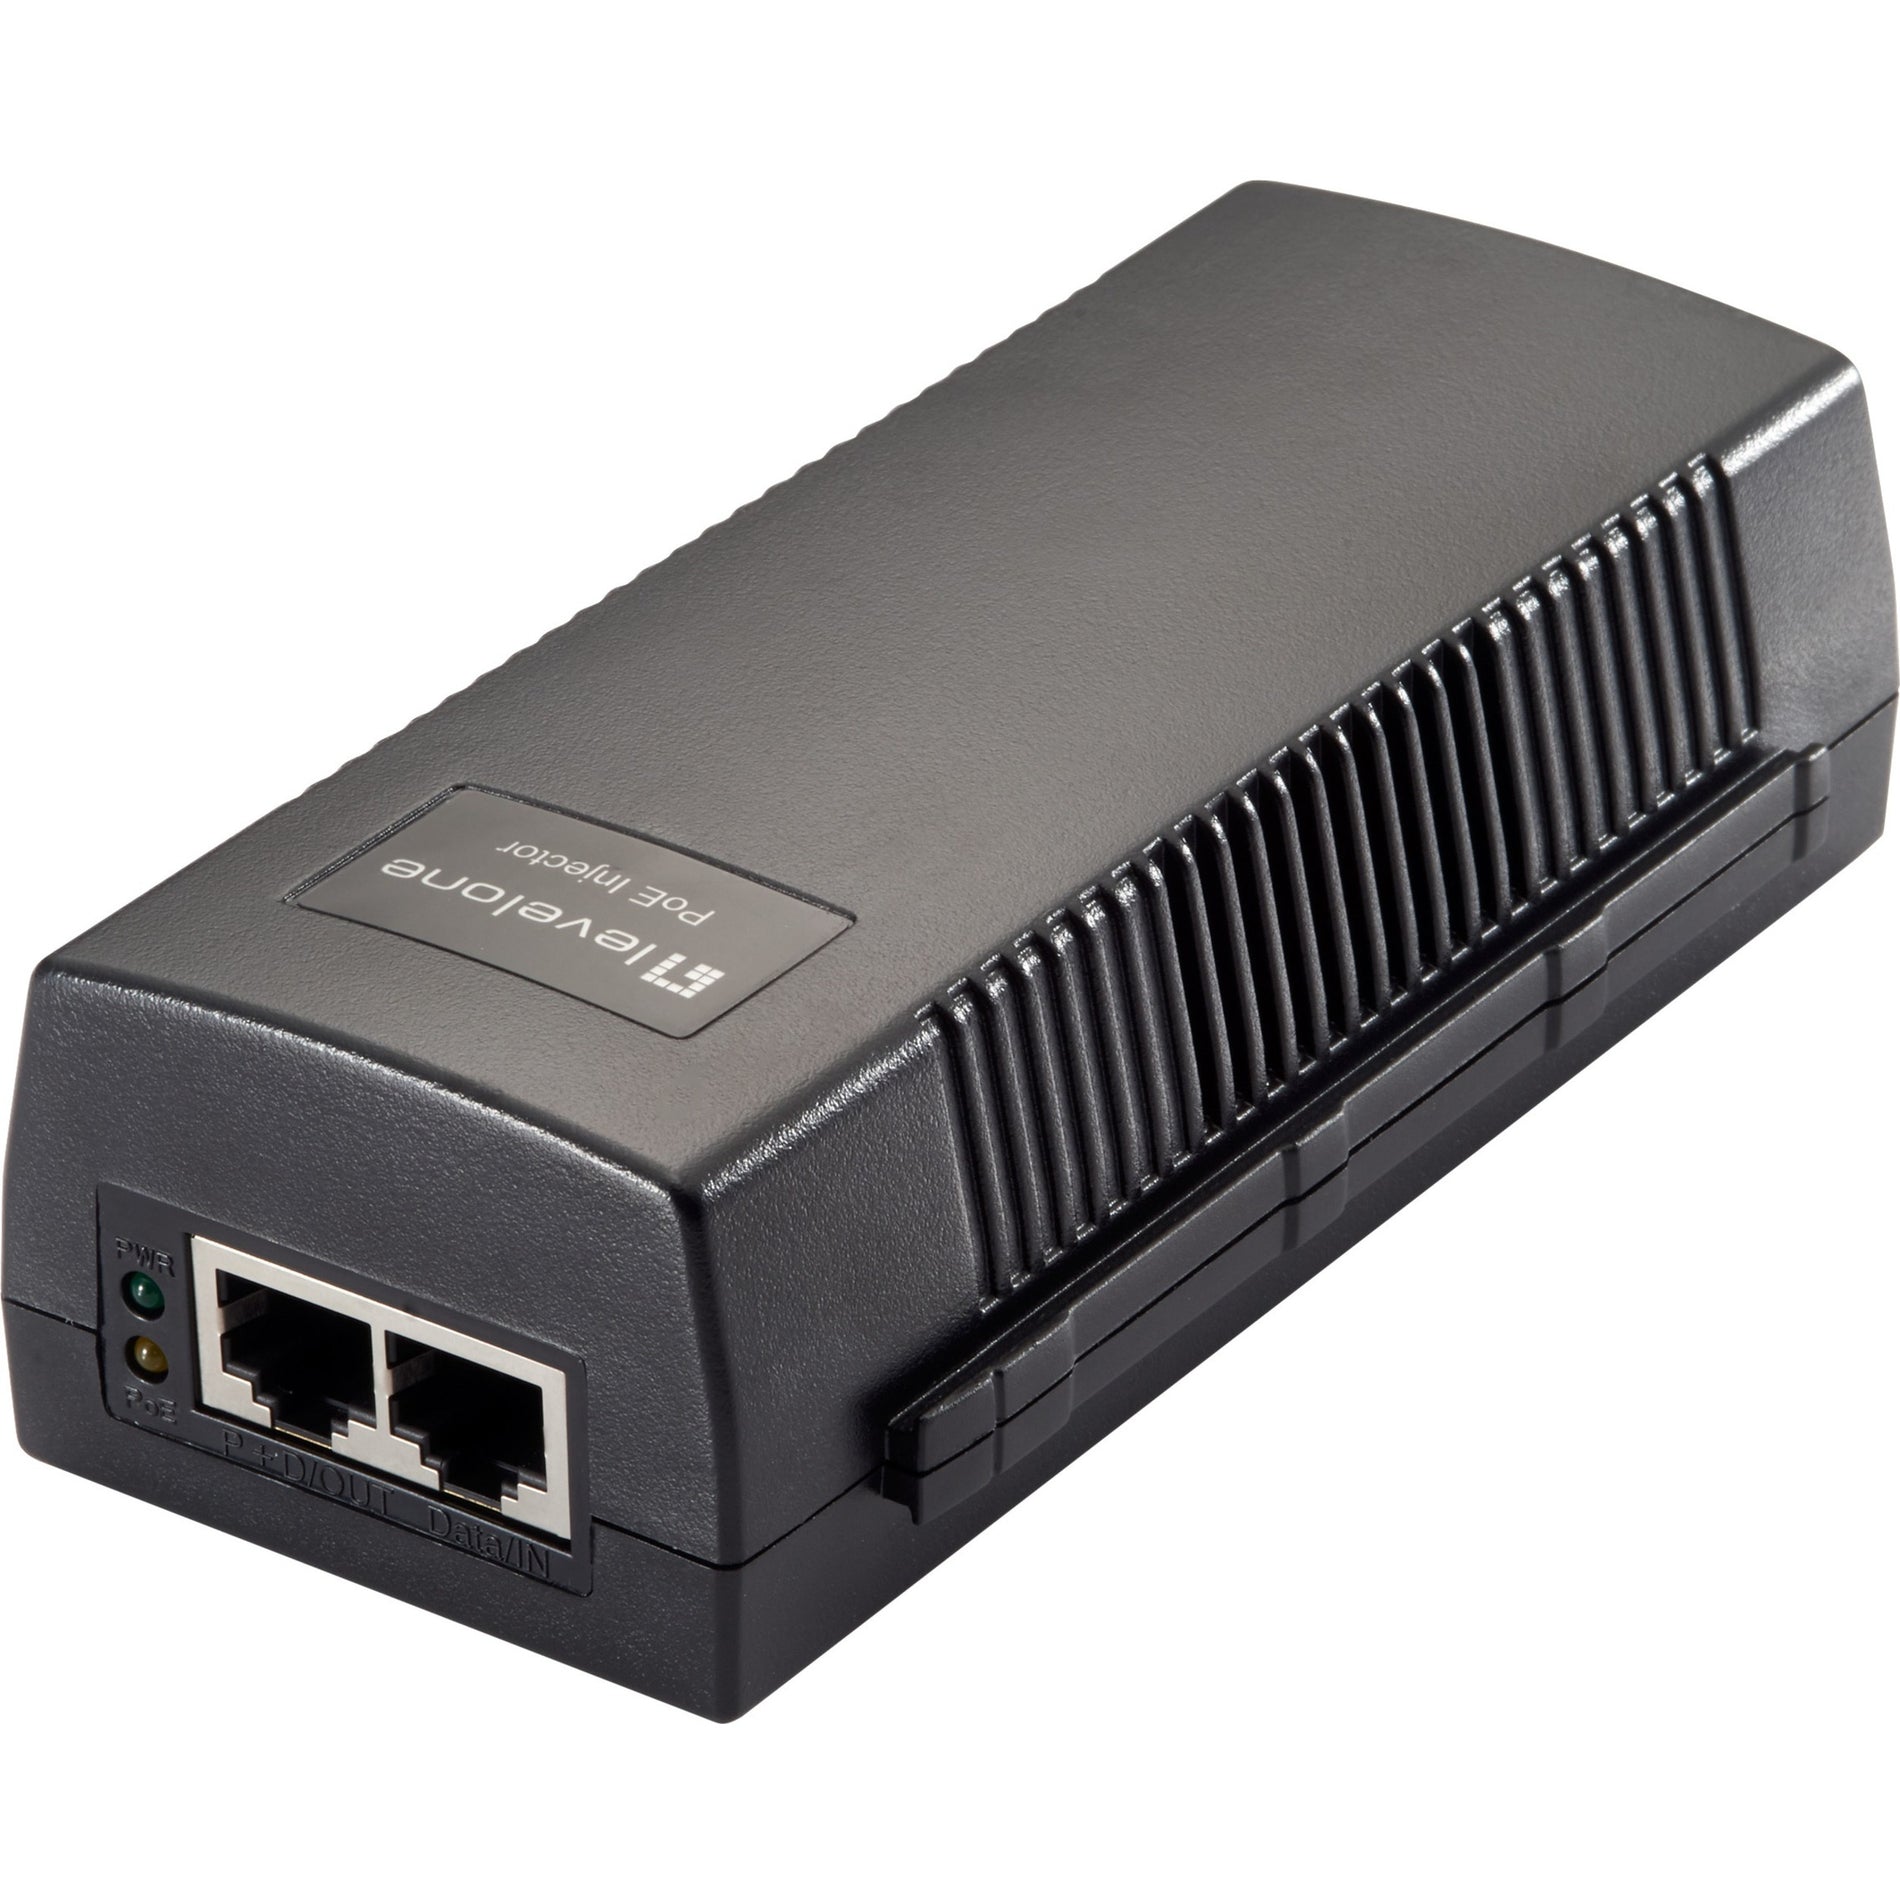 LevelOne POI-3014 Gigabit PoE Injector, 30W - Power Over Ethernet for Efficient Network Connectivity